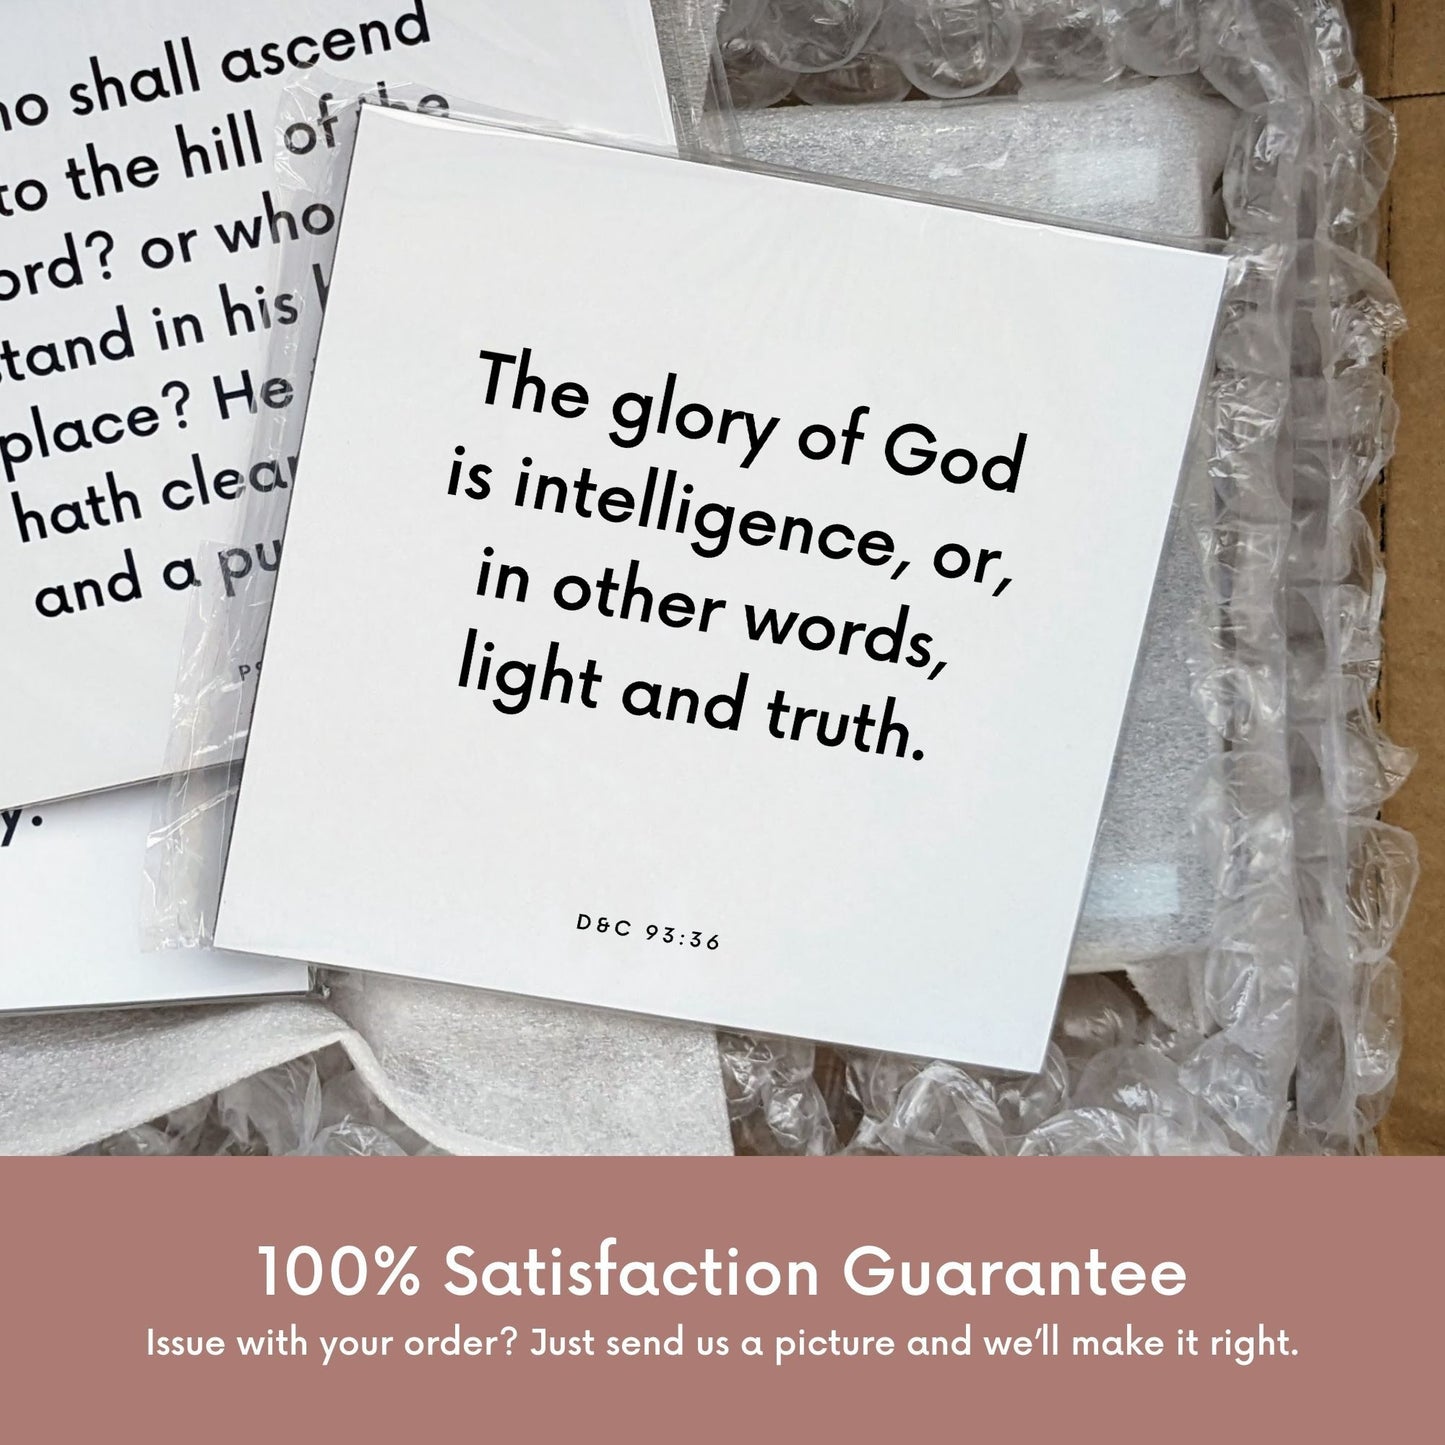 Shipping materials for scripture tile of D&C 93:36 - "The glory of God is intelligence"